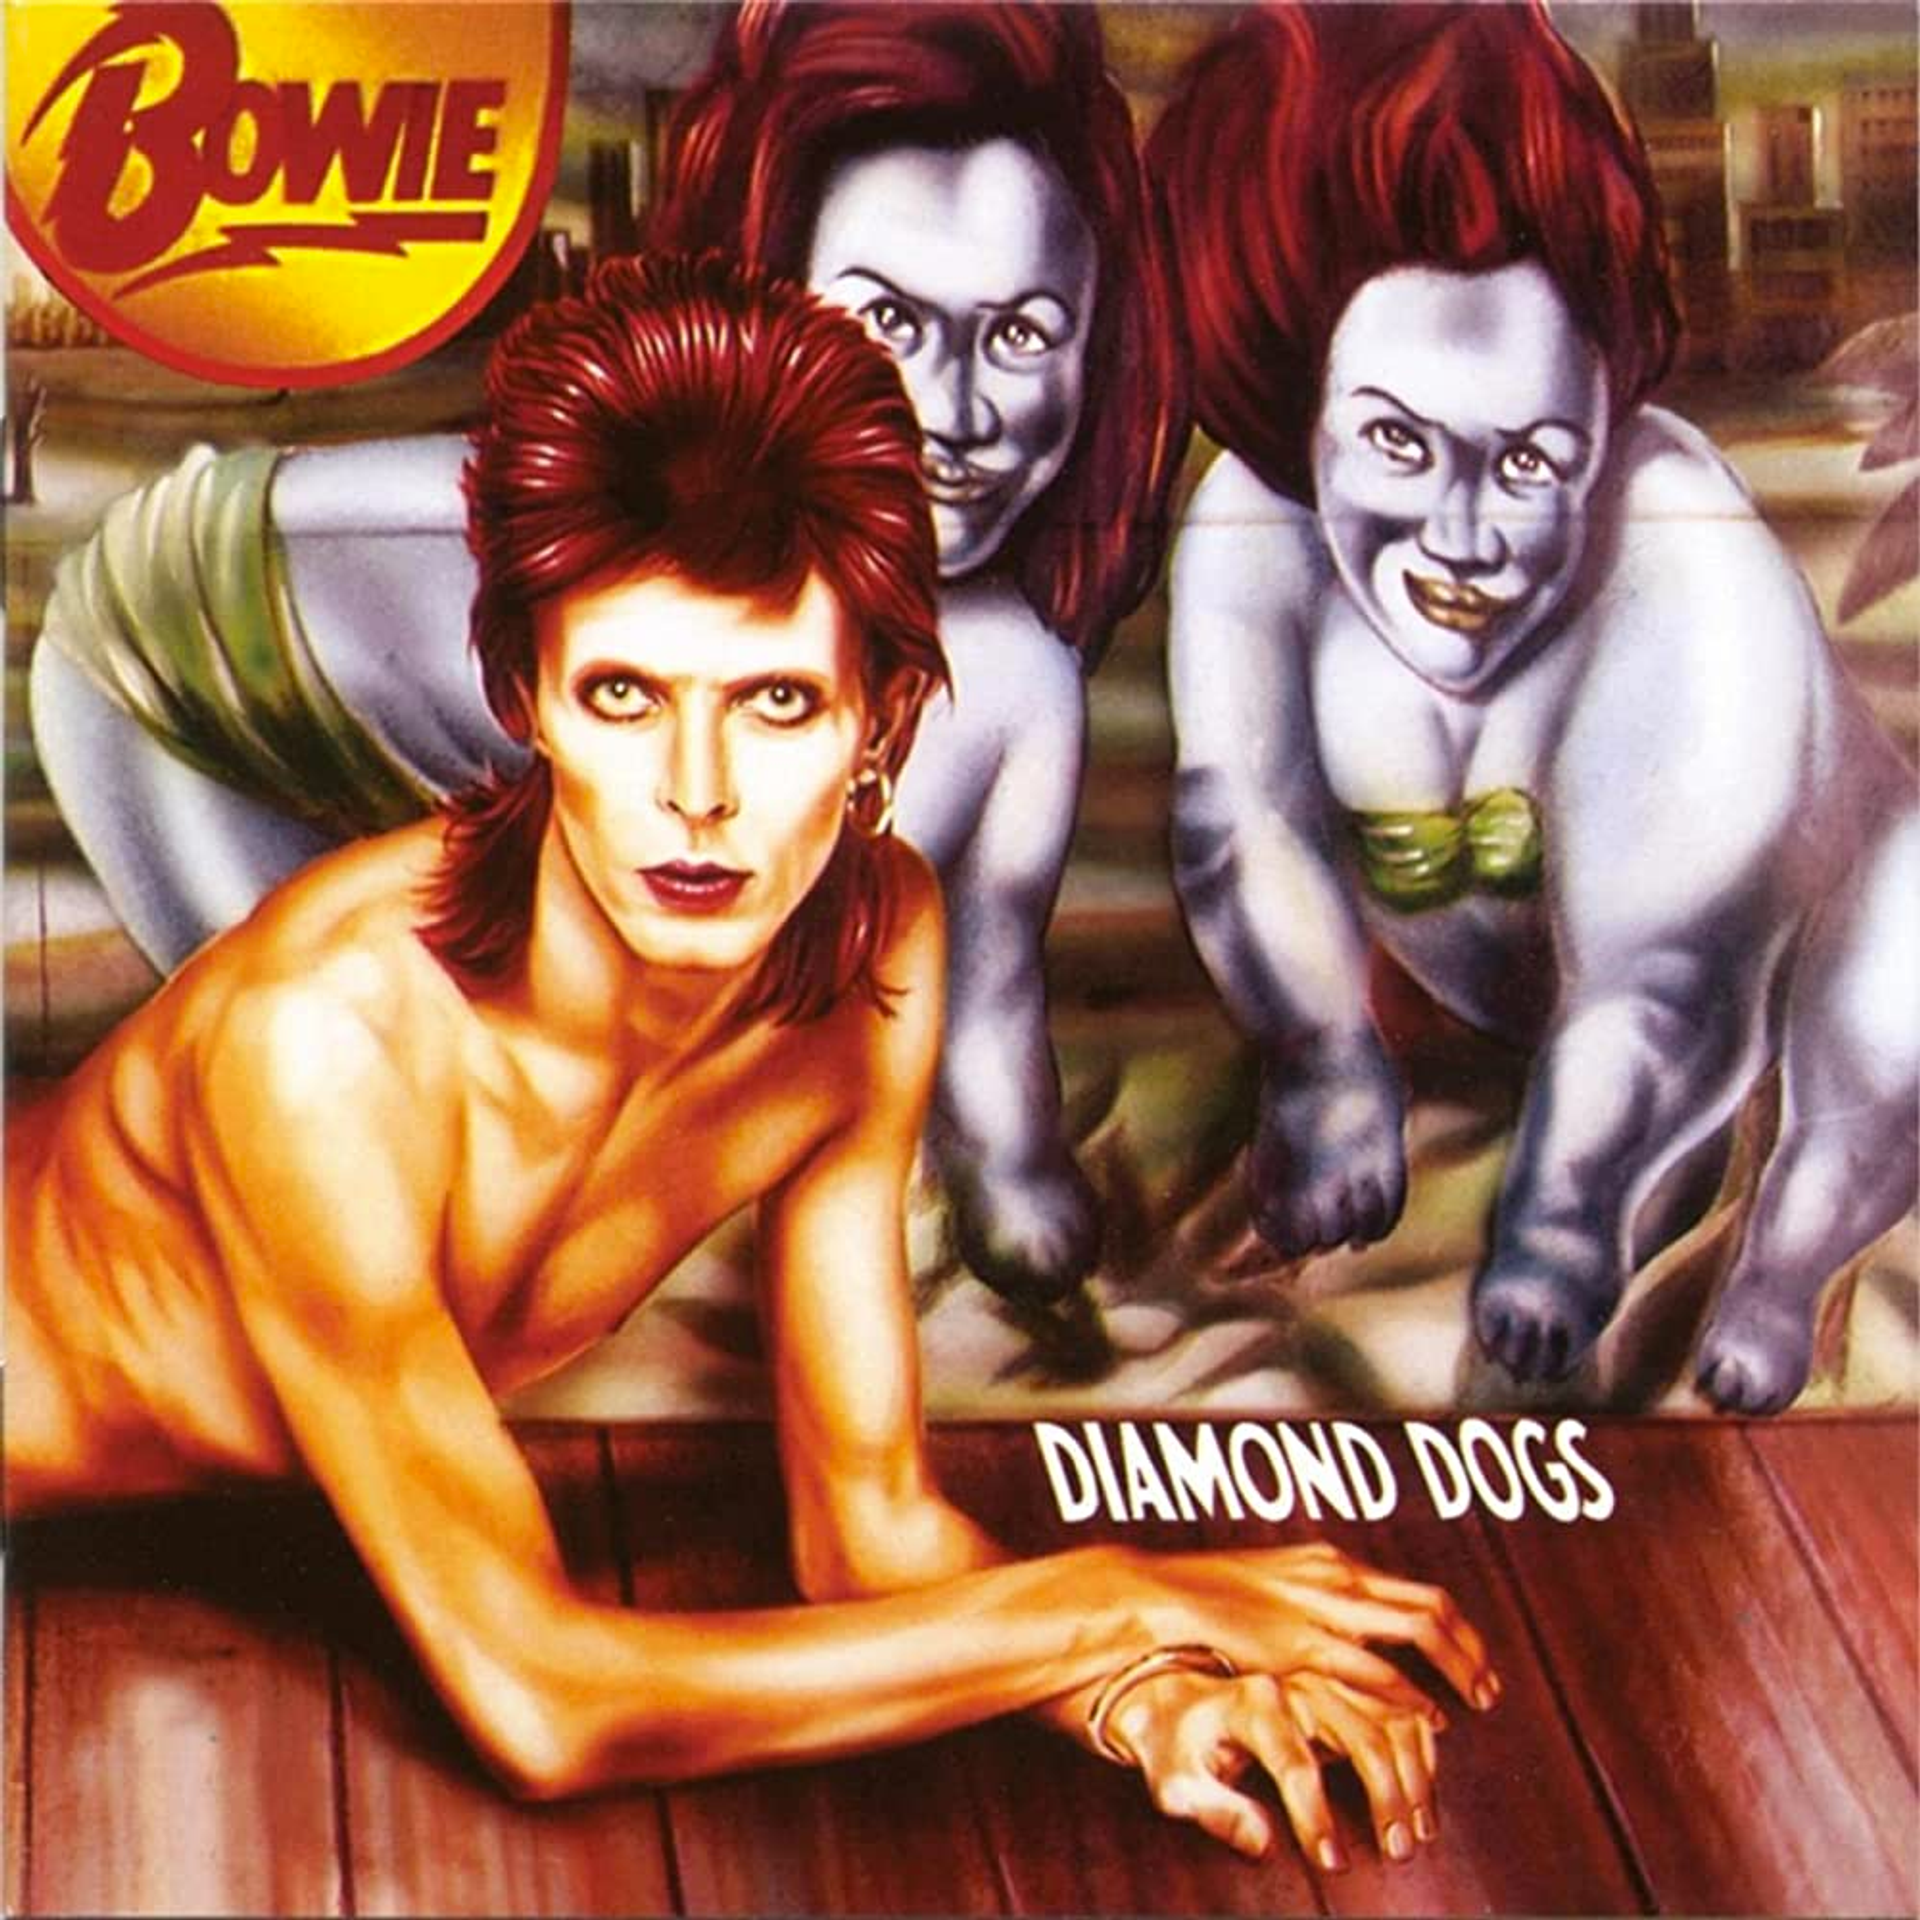 An image of the album cover for Diamond Dogs by David Bowie, designed by Guy Peellaert. It shows the artist, shirtless, in front of two troll-like figures.